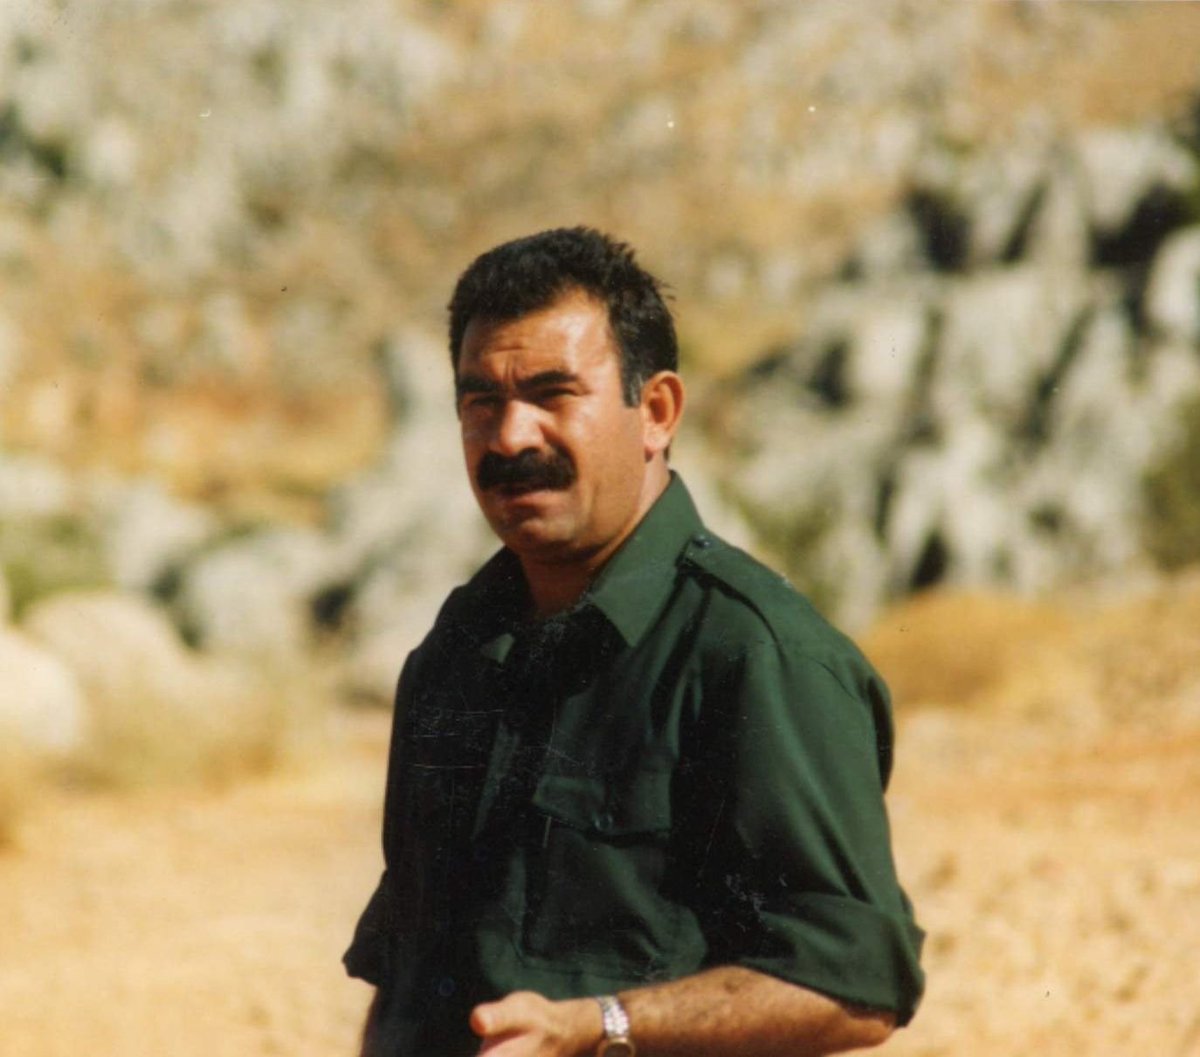 Today (or Tomorrow) marks 74 years since Abdullah Öcalan began his journey on this planet.
A journey that teaches us how people can change and grow in incredible ways, that we are destined to a better future, away from hierarchies and oppression.
Biji Serok Apo!
#FreeOcalan